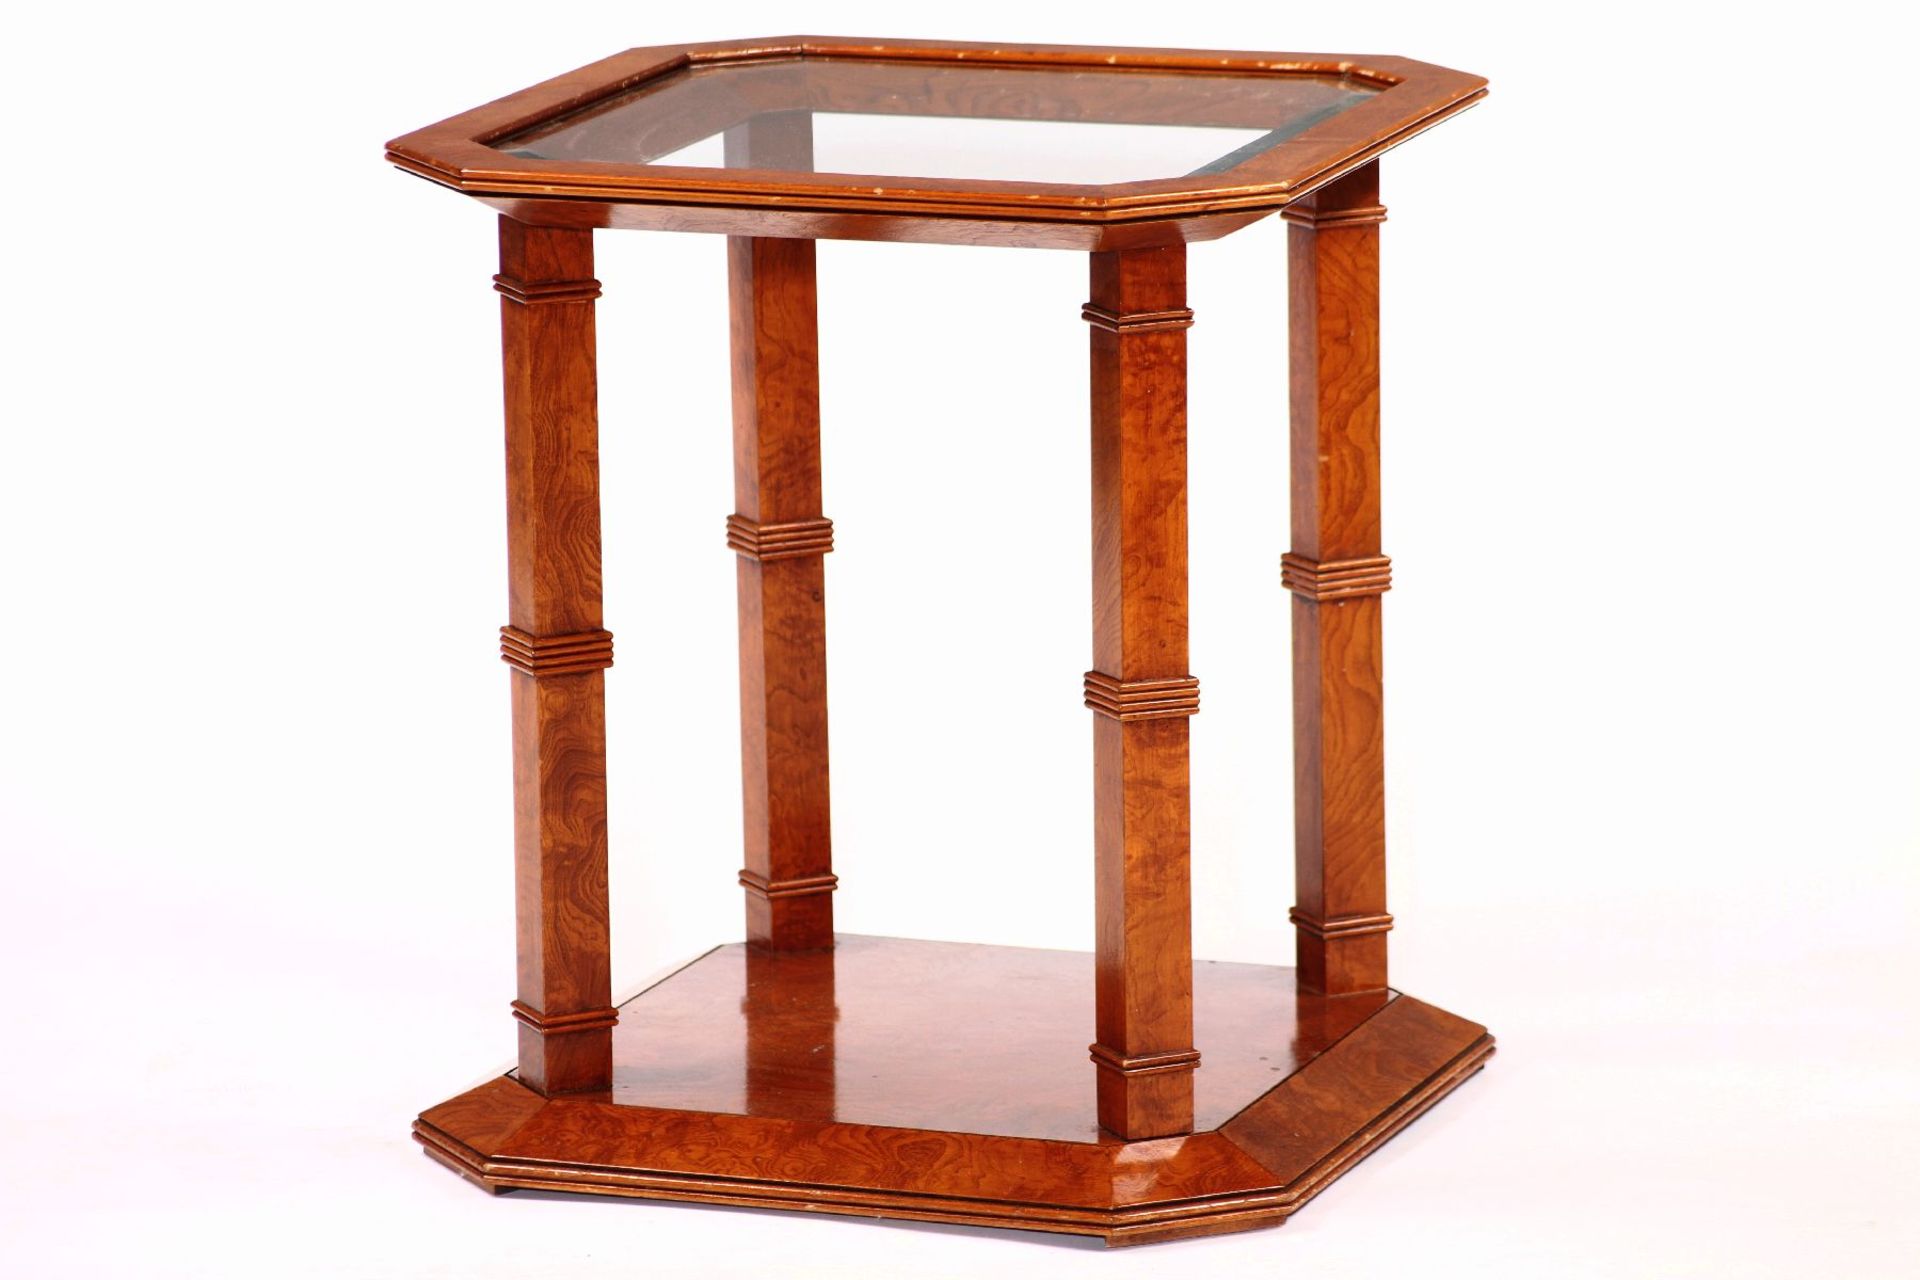 Side table, solid root wood, stained red- brown, beautiful wood grain, octagonal, inlaidfaceted